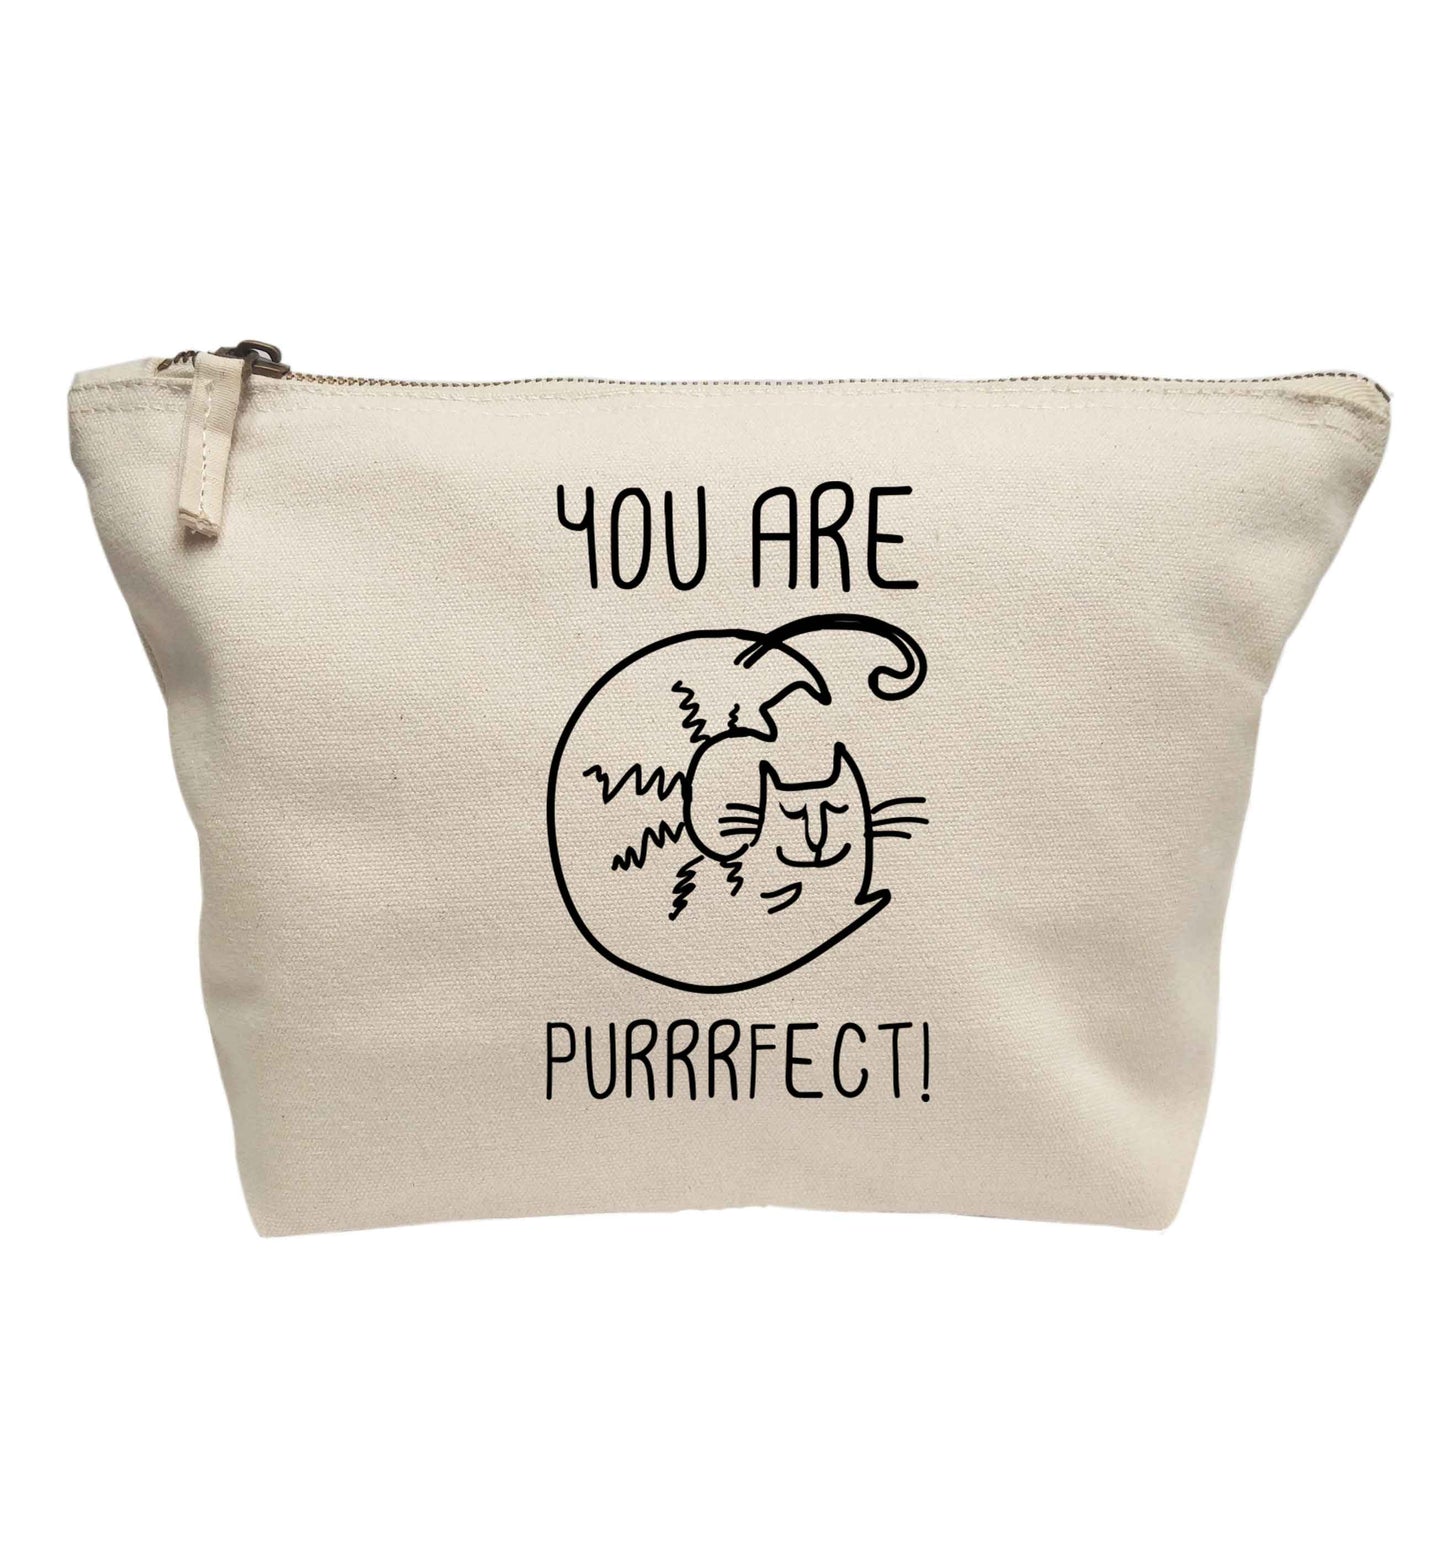 You are purrfect | Makeup / wash bag